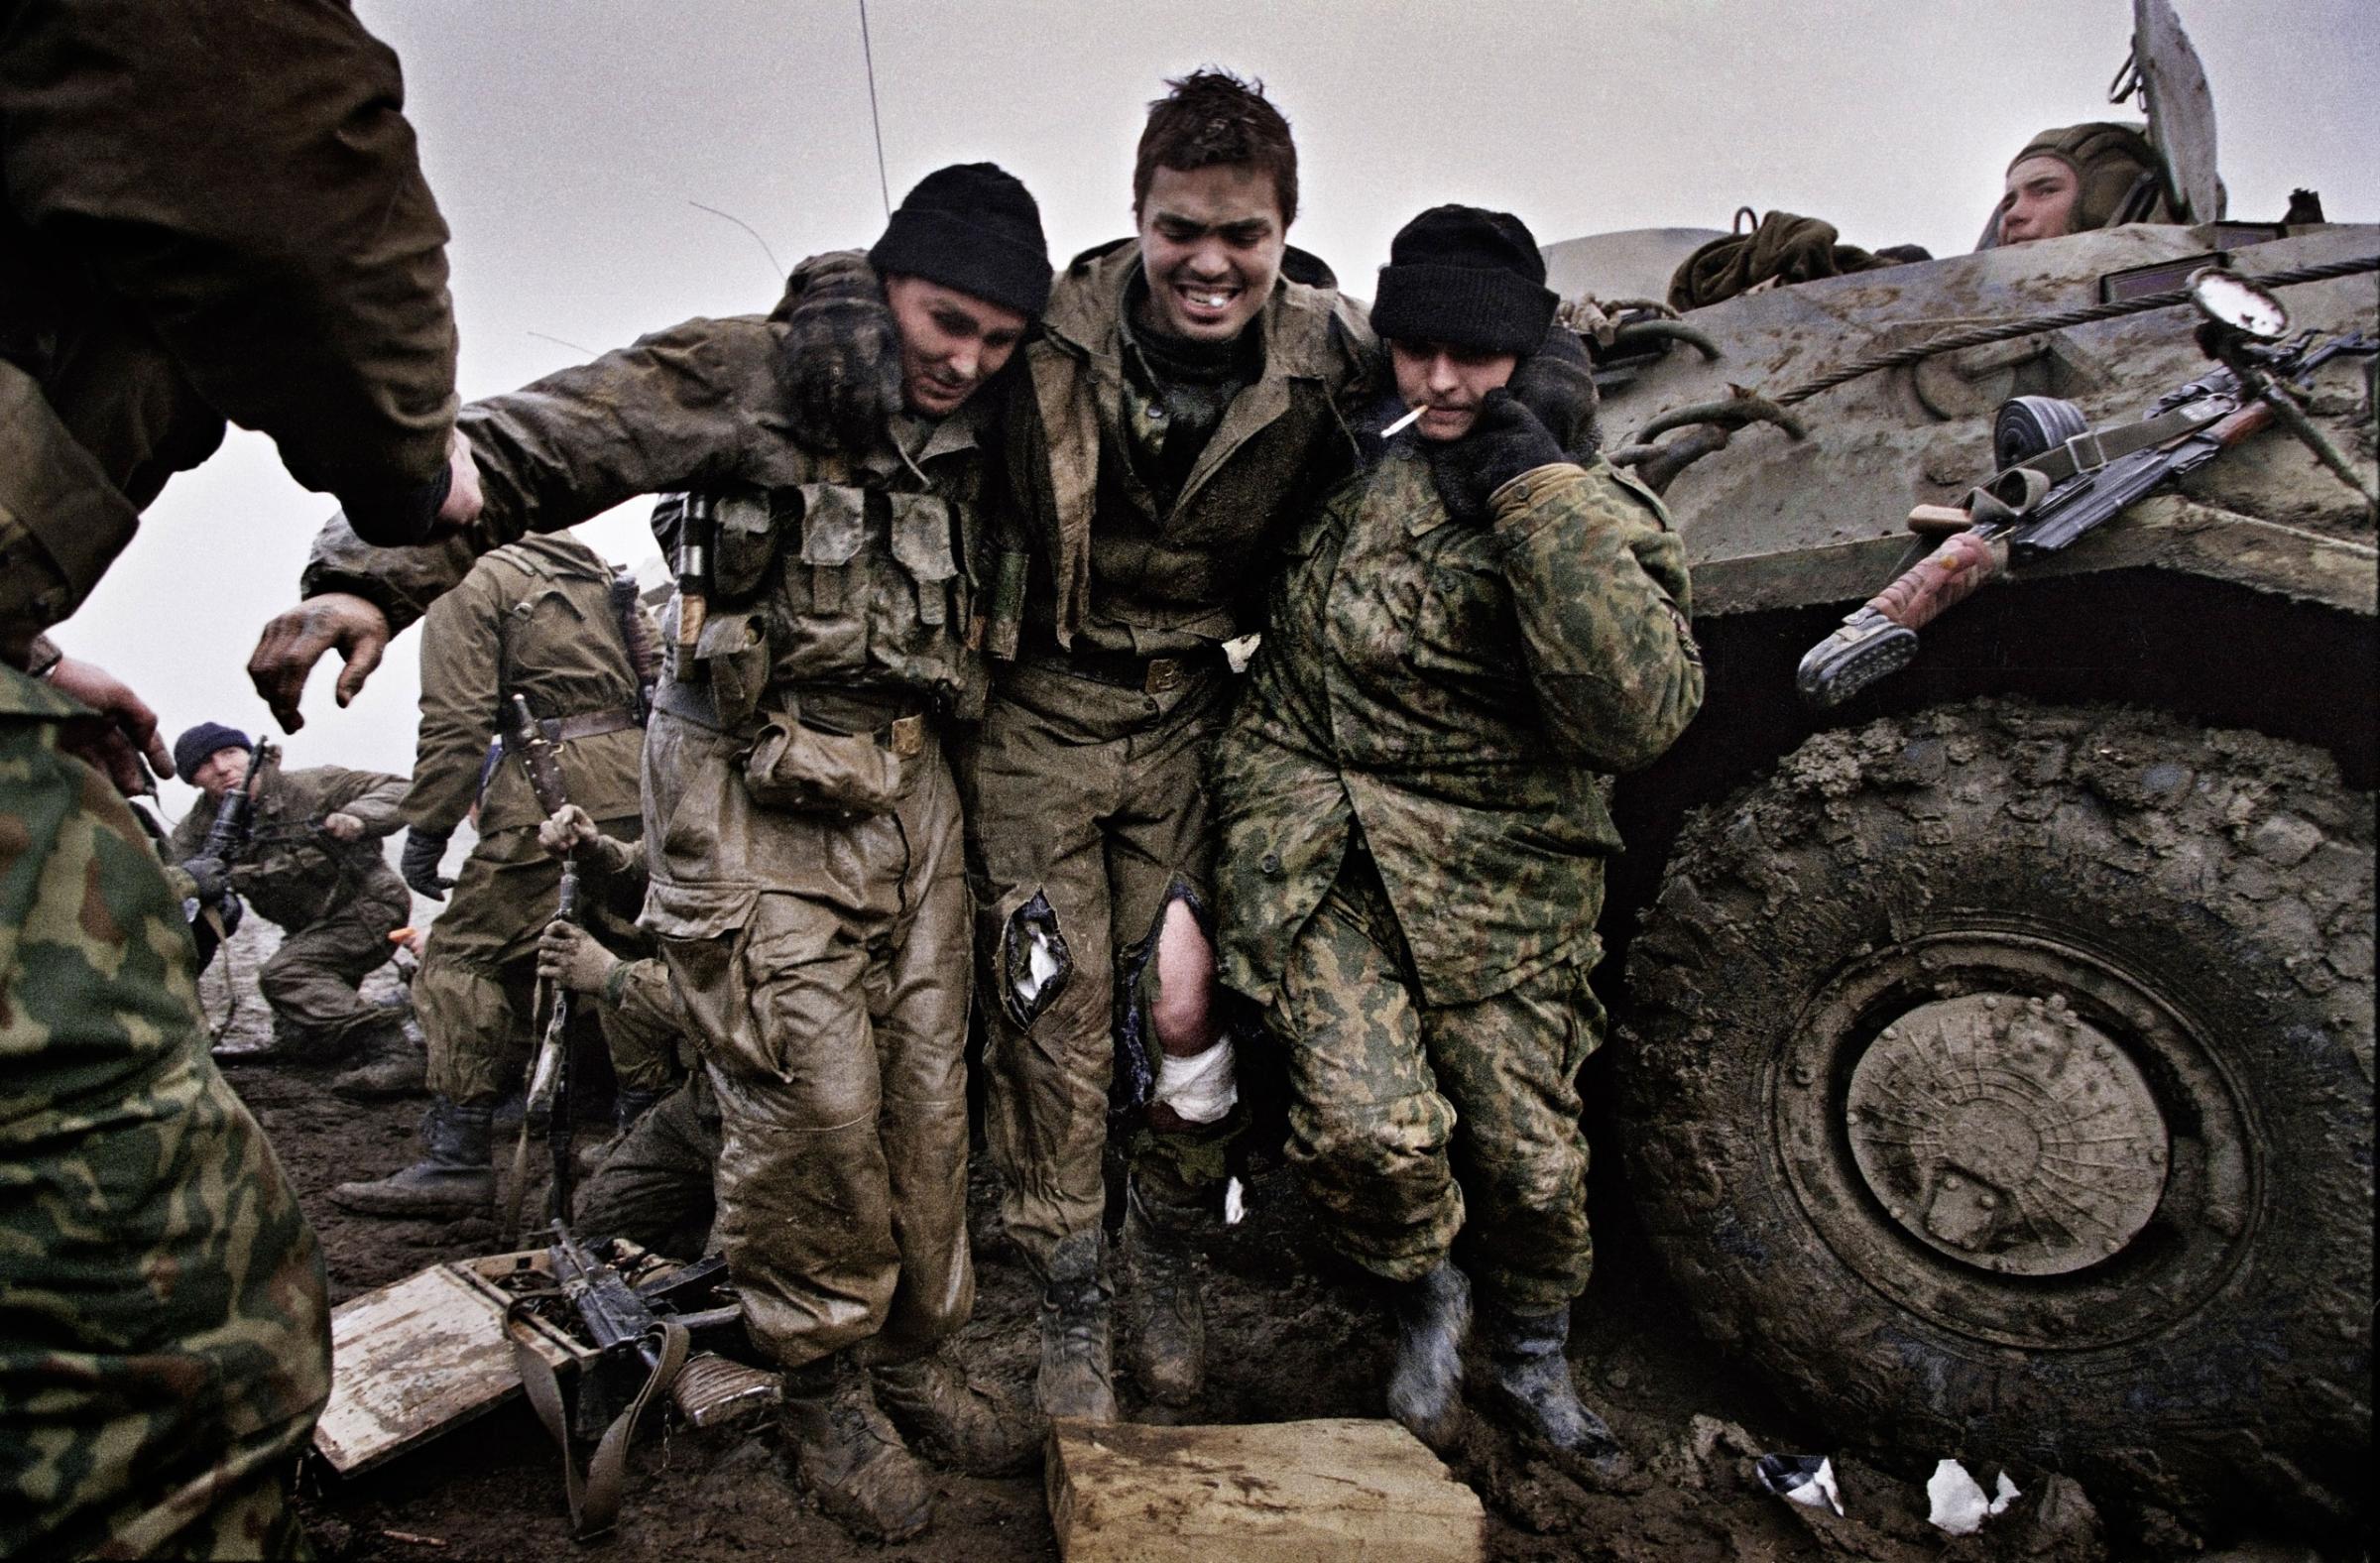 Russian marines help a wounded fellow soldier after being caught in an ambush near Tsentaroy, Checnya, Dec. 1999. Yuri Kozyrev—NOOR